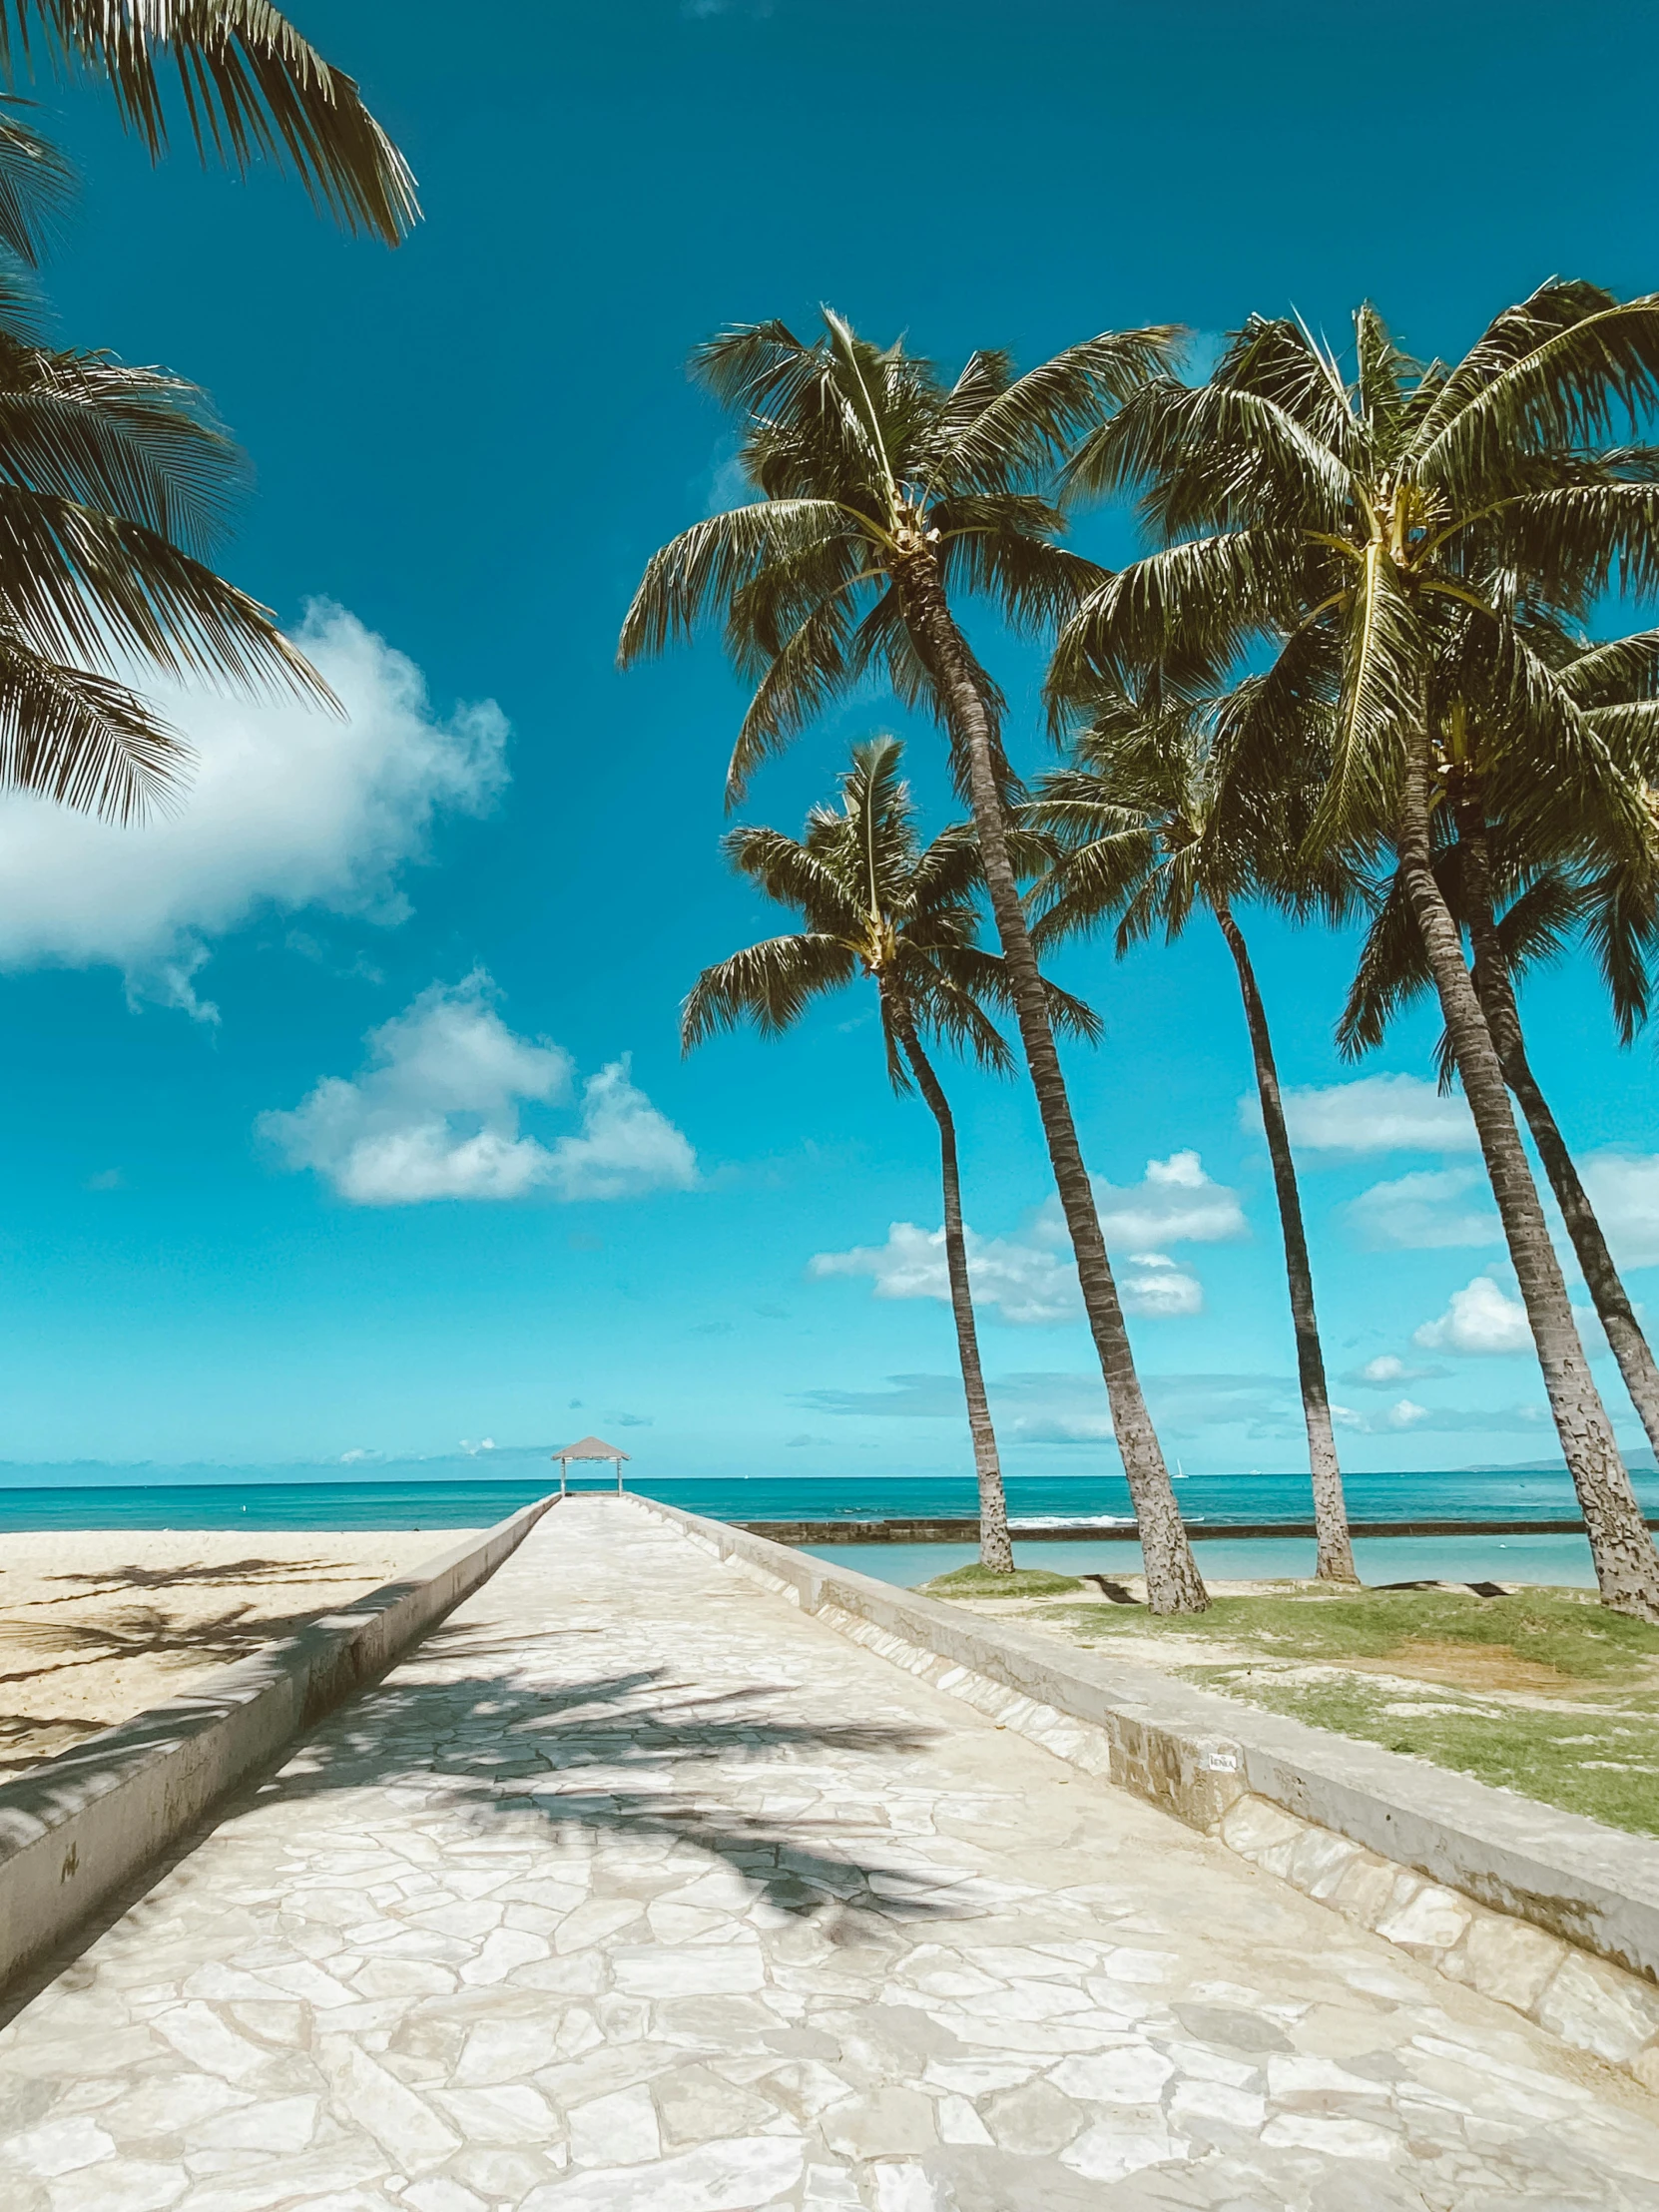 a street lined with palm trees next to the ocean, standing on a beach, slide show, flatlay, background image